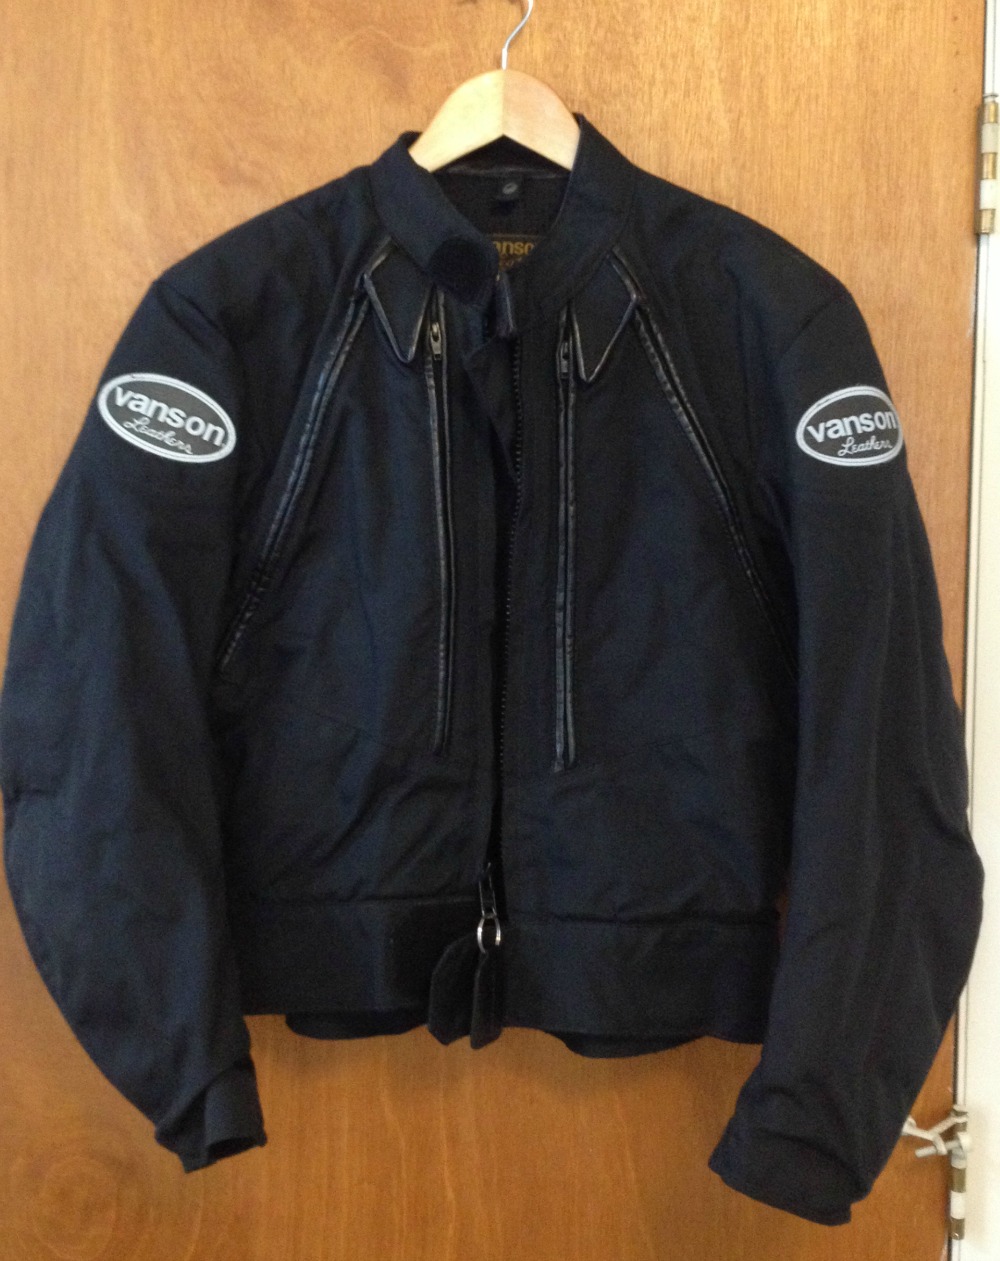 Viewing Images For Vanson Falcon Textile Jacket :: MotorcycleGear.com